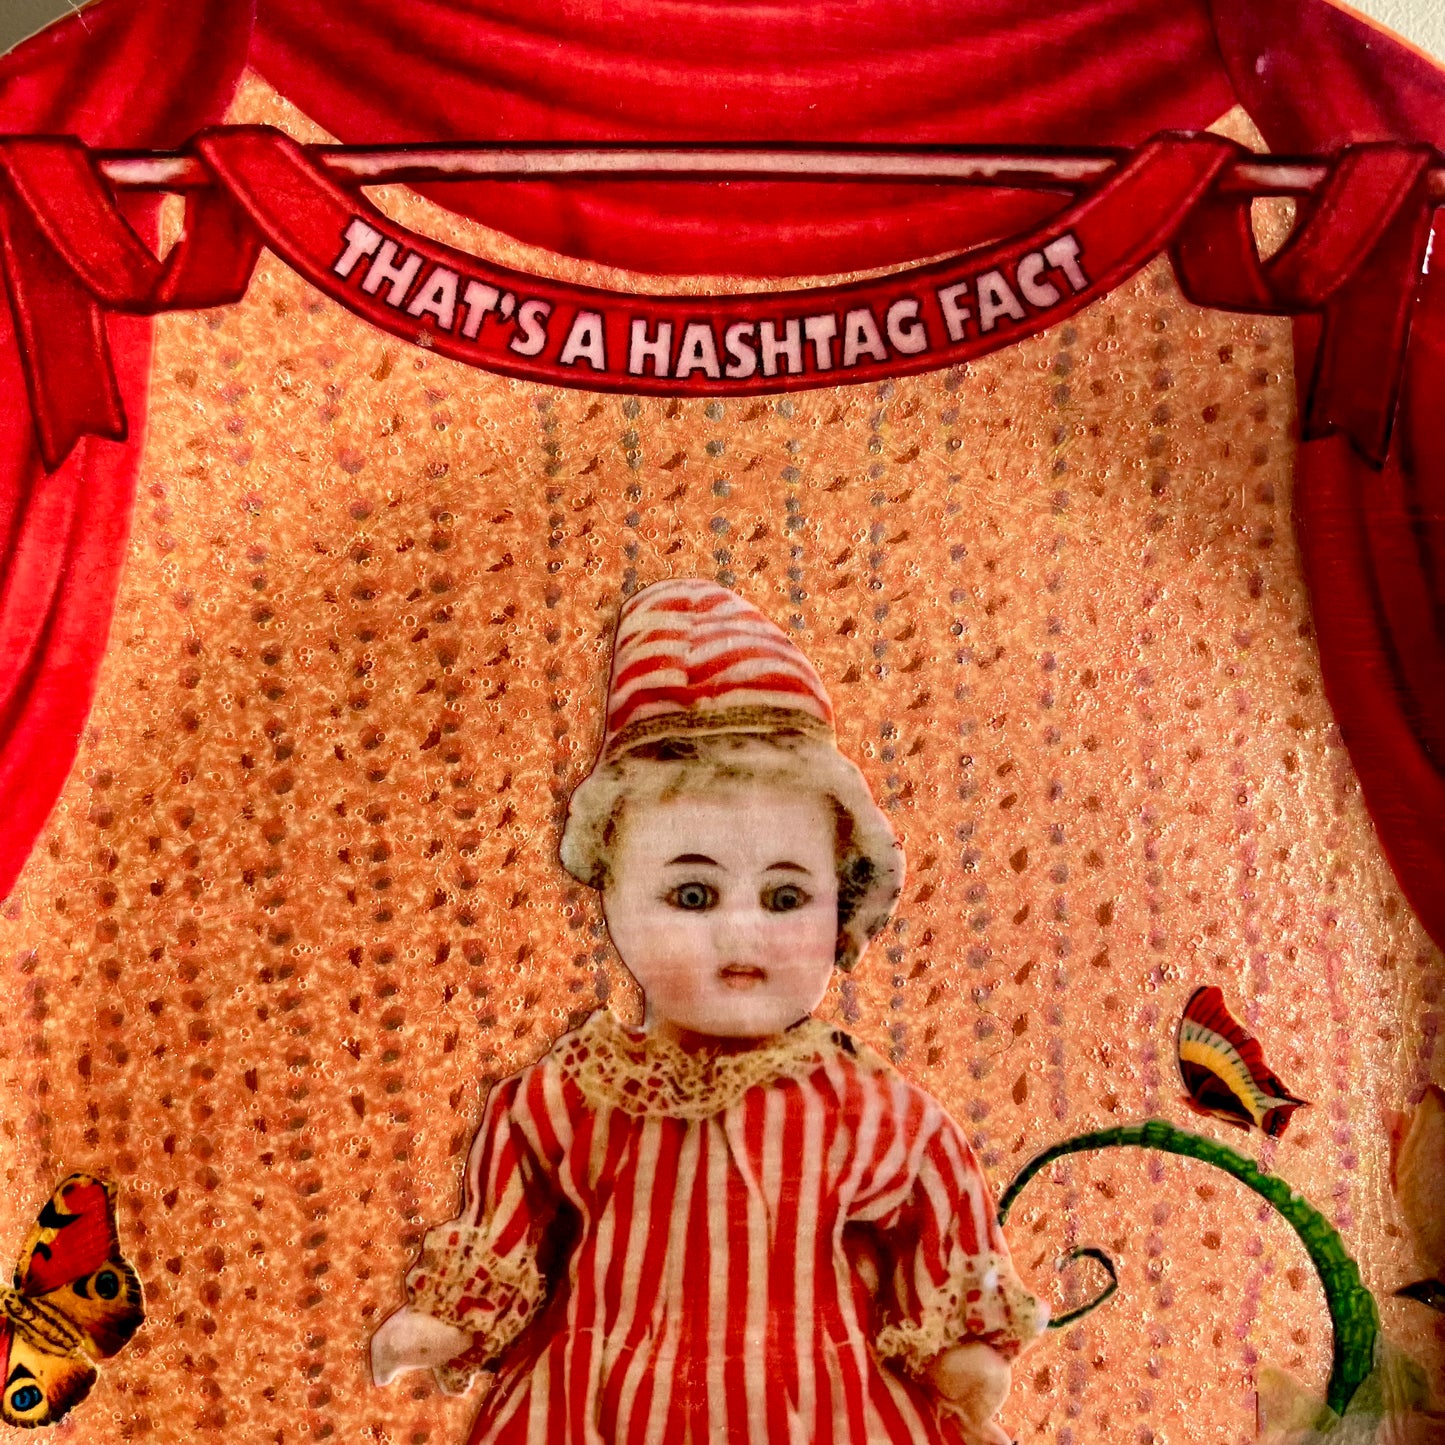 "That's A Hashtag Fact" Wall Plate by House of Frisson, closeup detail of the collage showing a felt doll, and the red curtains.